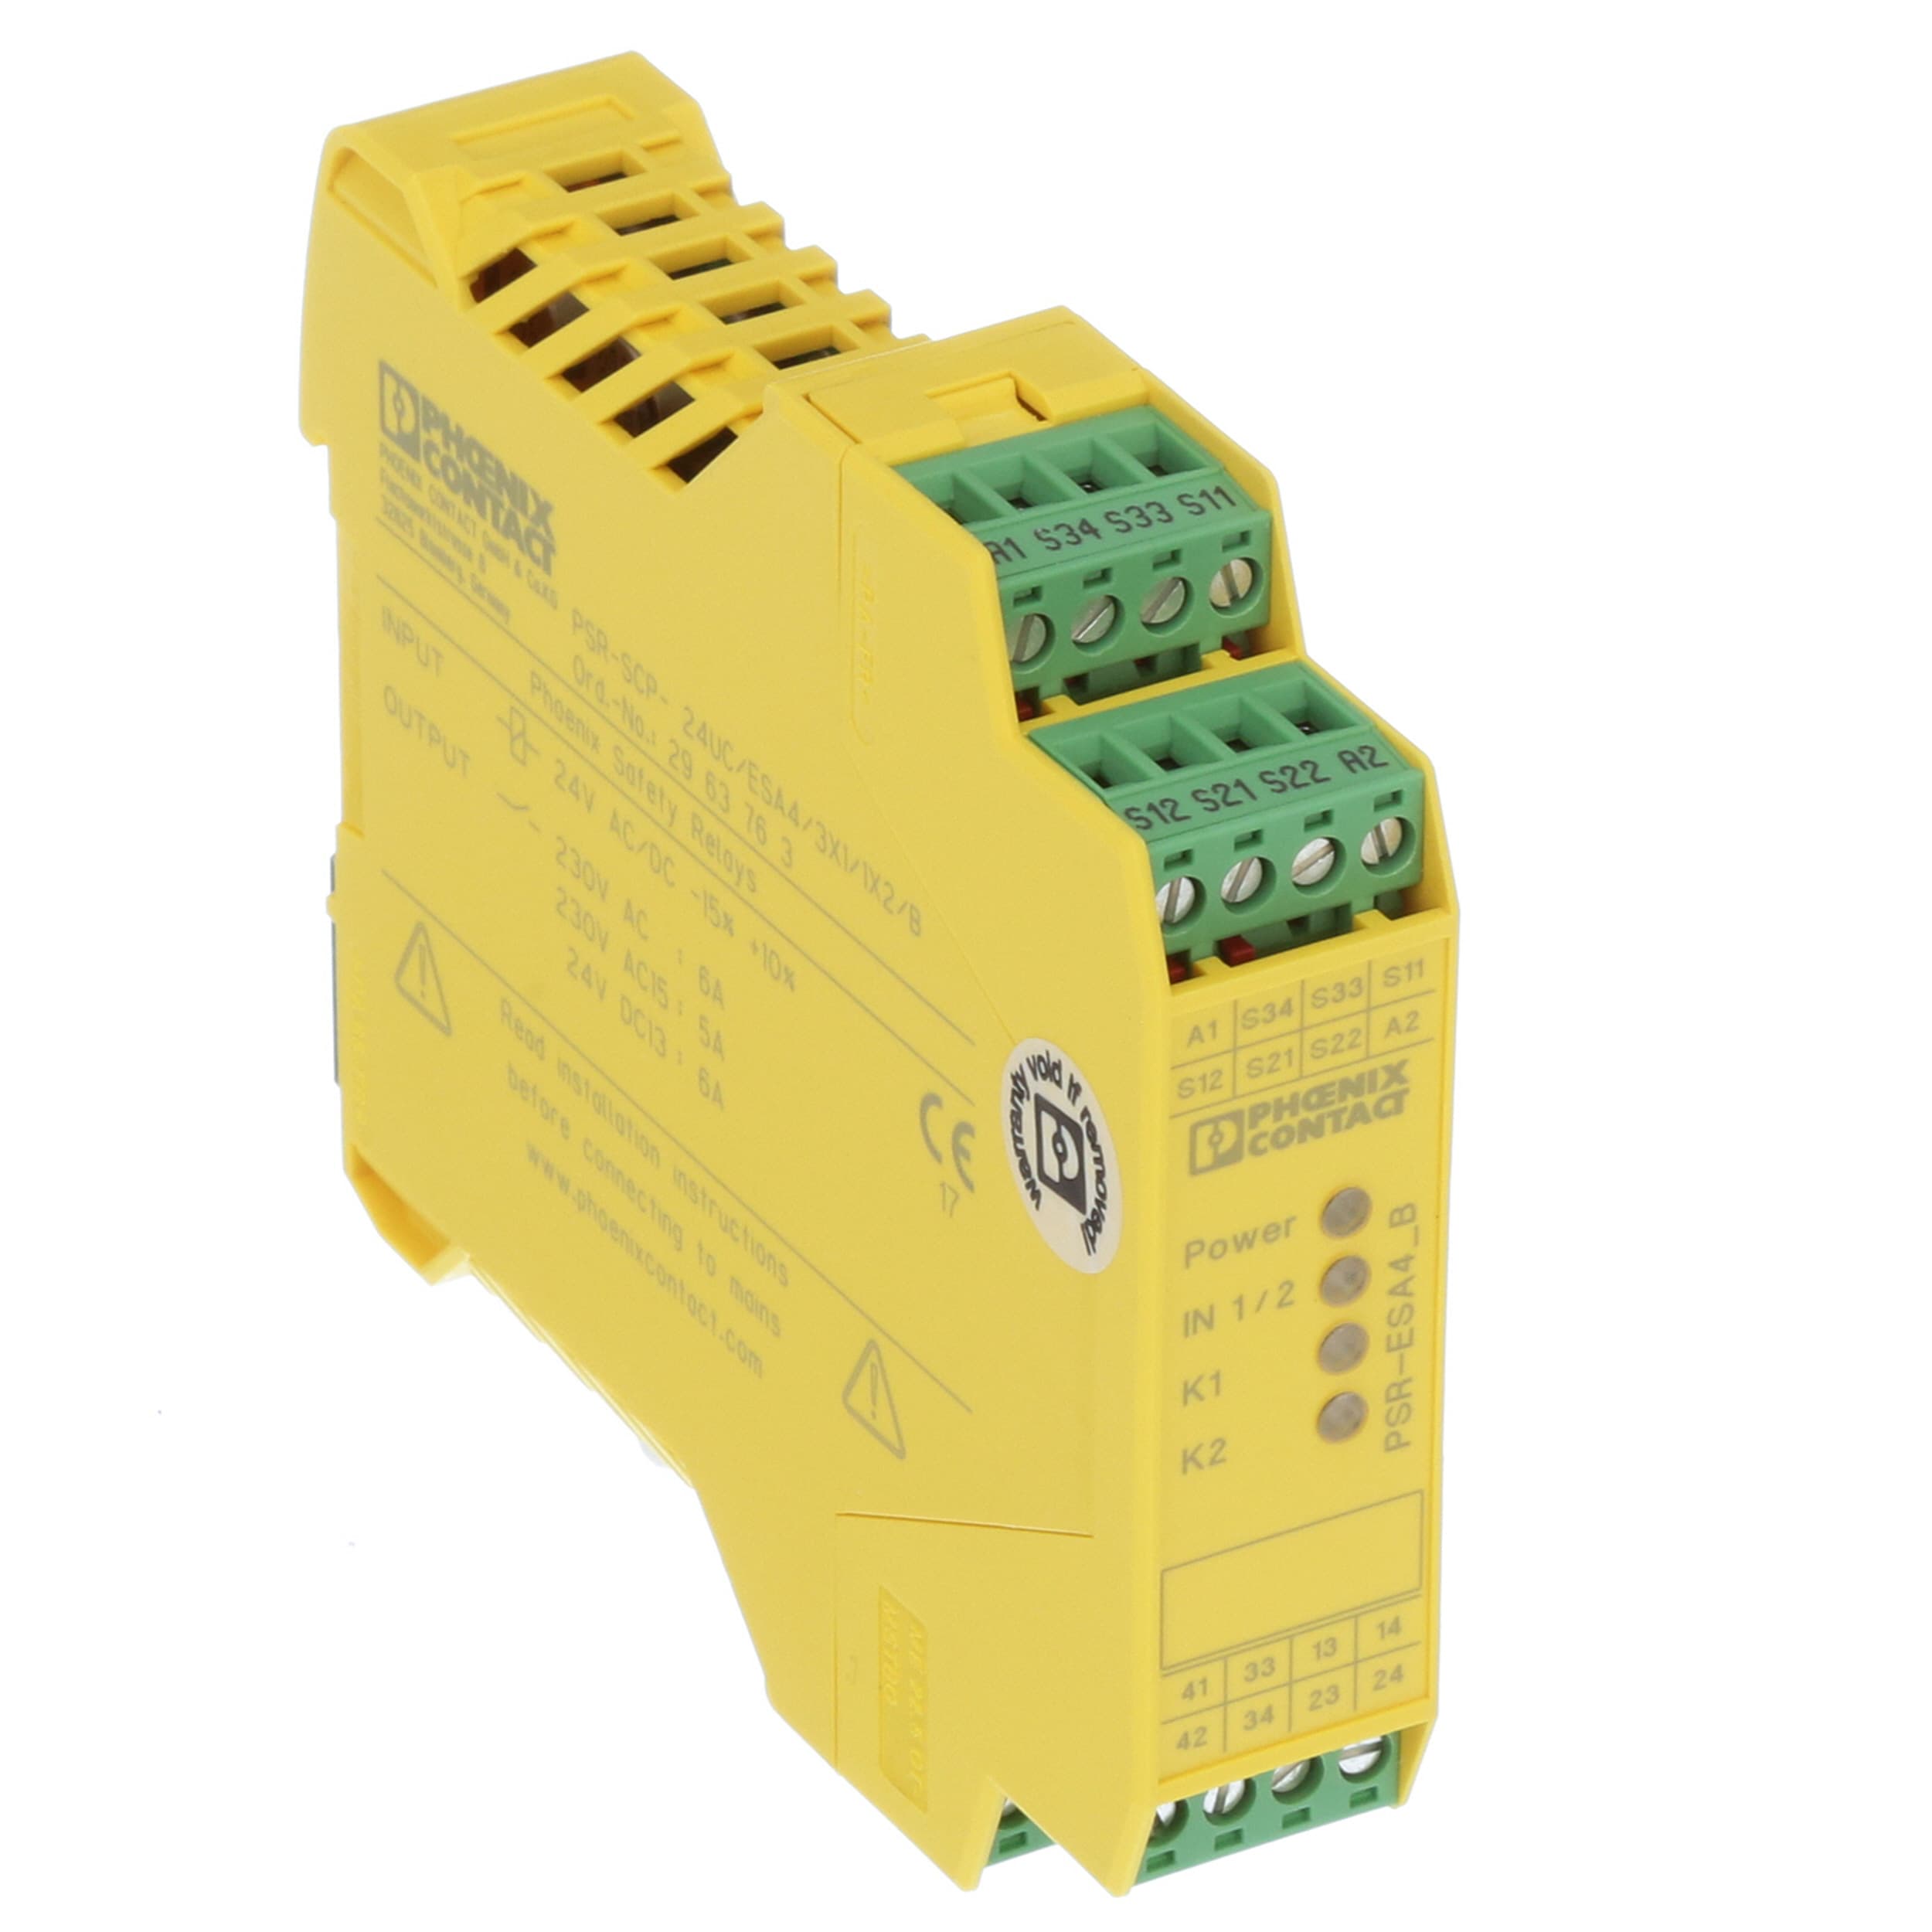 31616 PHOENIX CONTACT SAFETY RELAY, 2963750 (NEW) PSR-SCP-24UC/ESA4/2X1/1X2  - J316Gallery